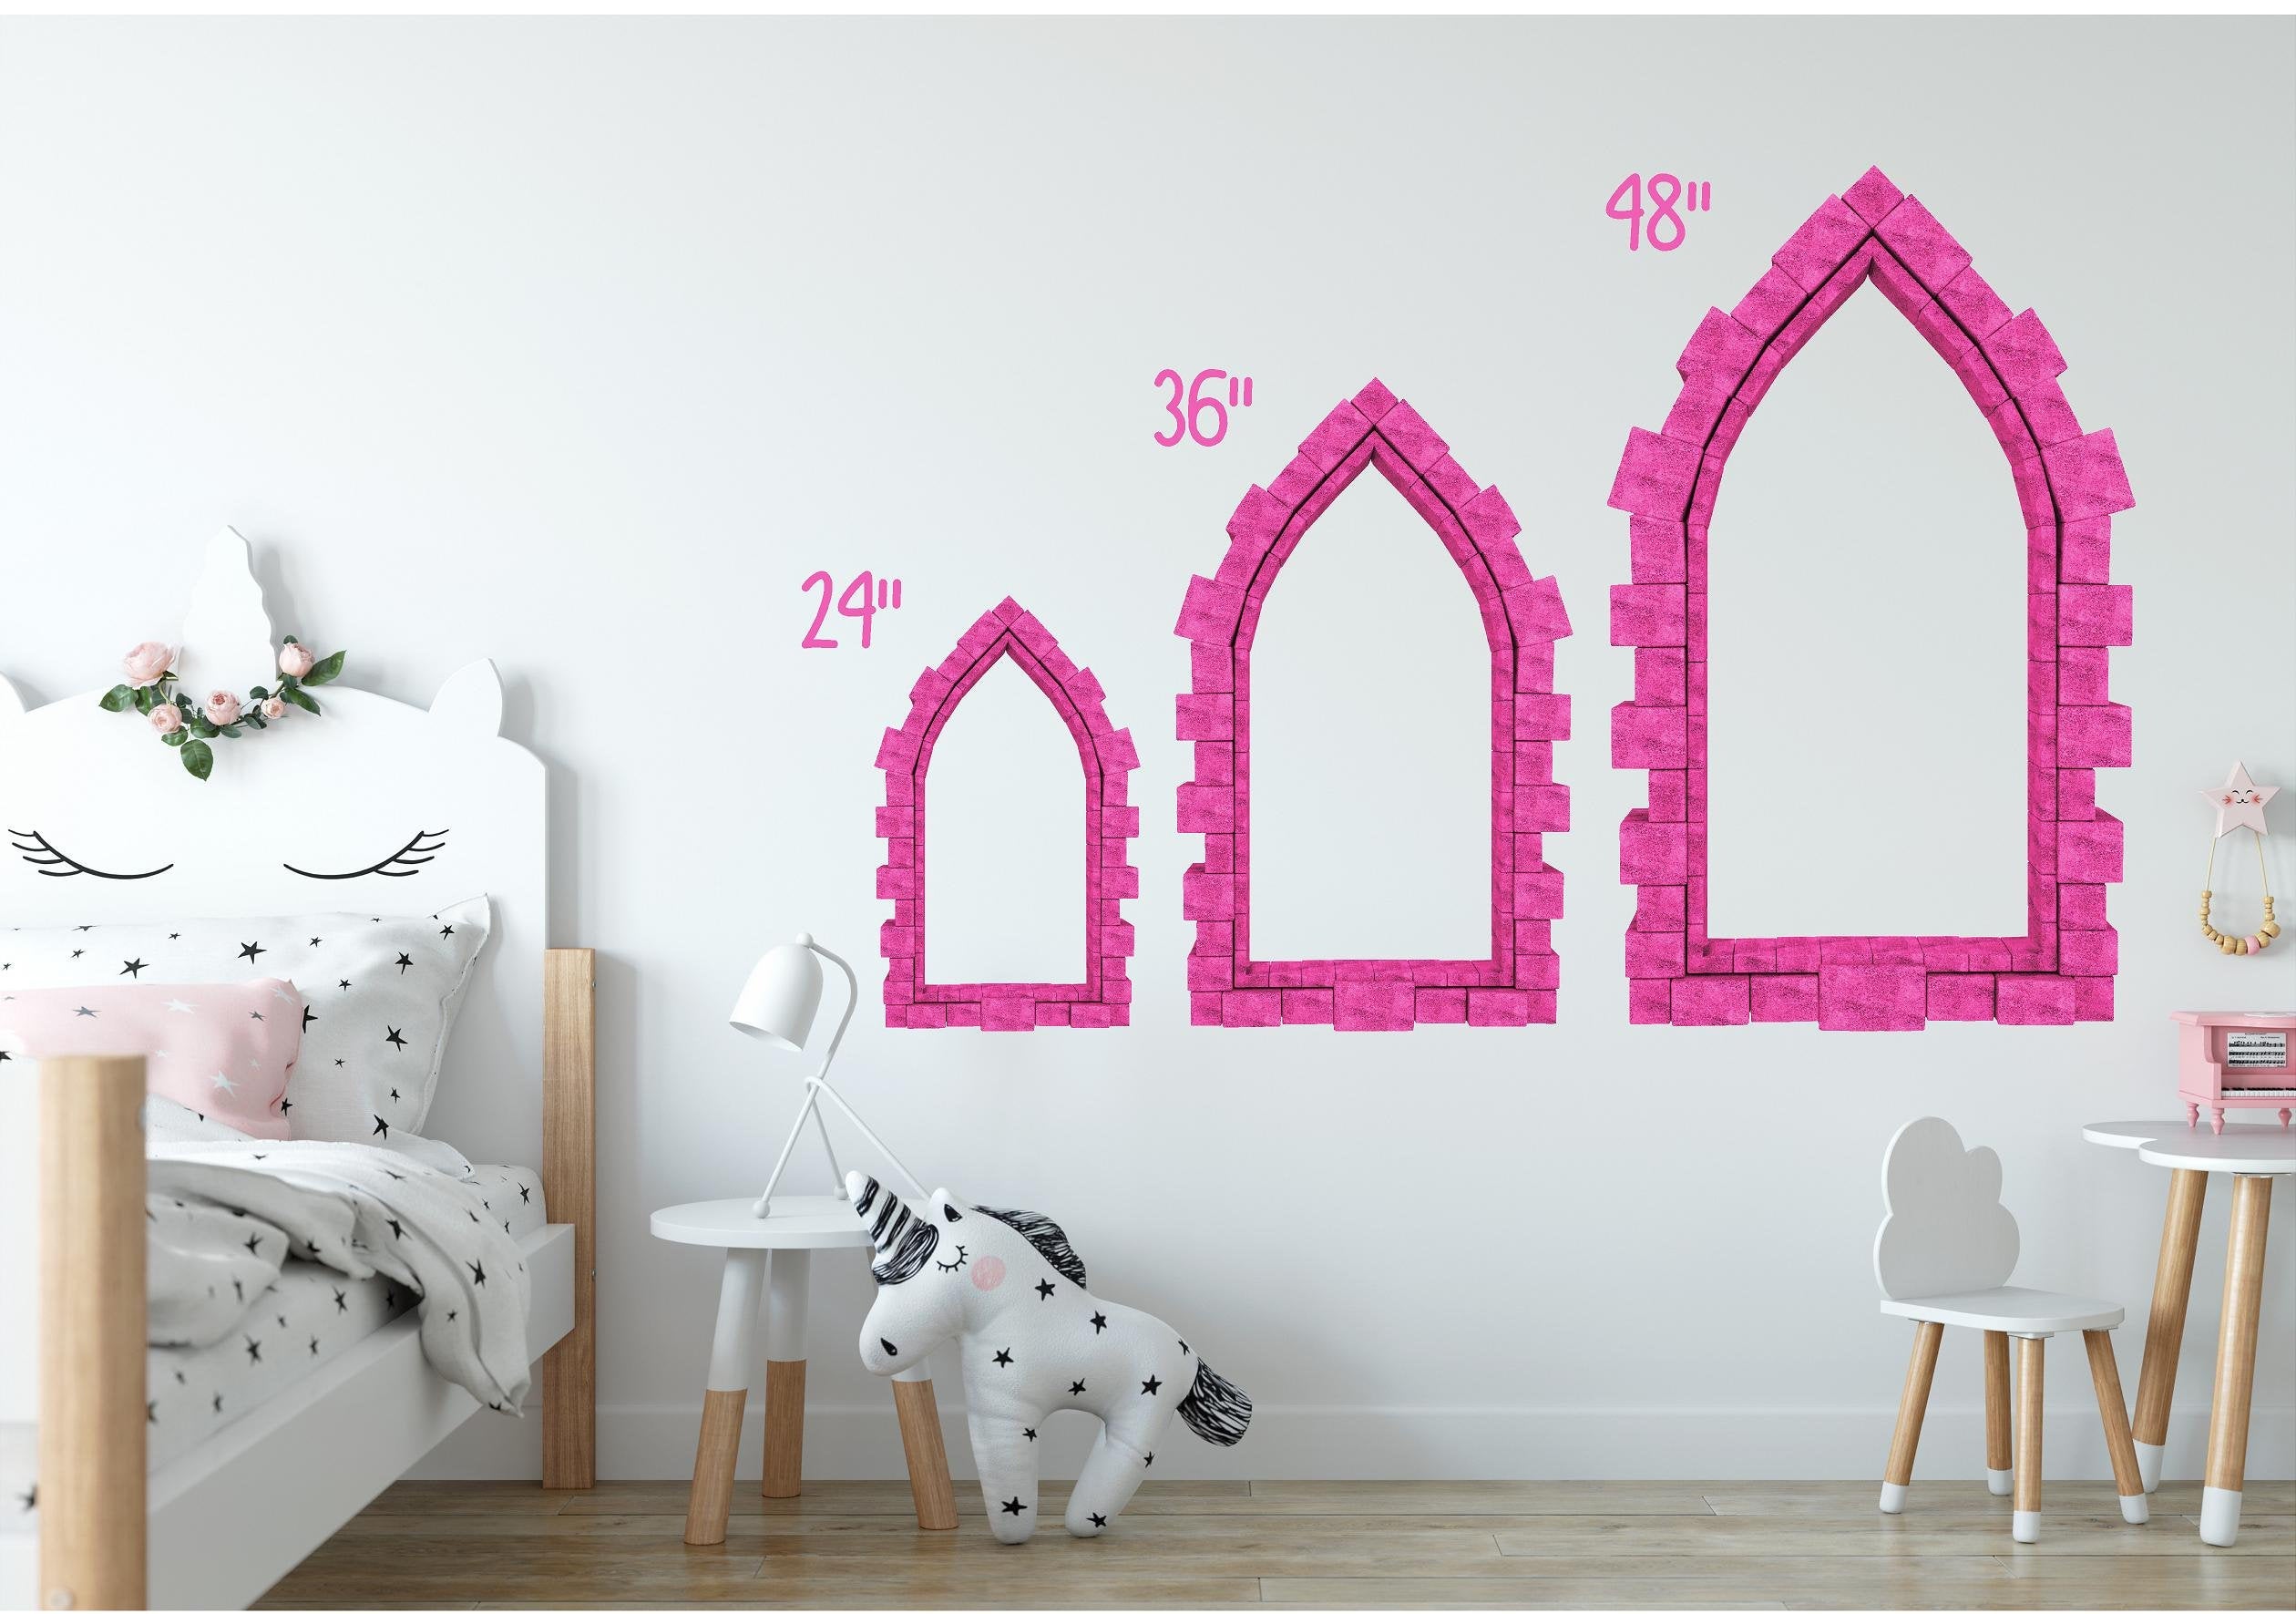 3D Castle Window Moonlight Unicorn Wall Decal Removable Fabric Vinyl Wall Sticker | DecalBaby